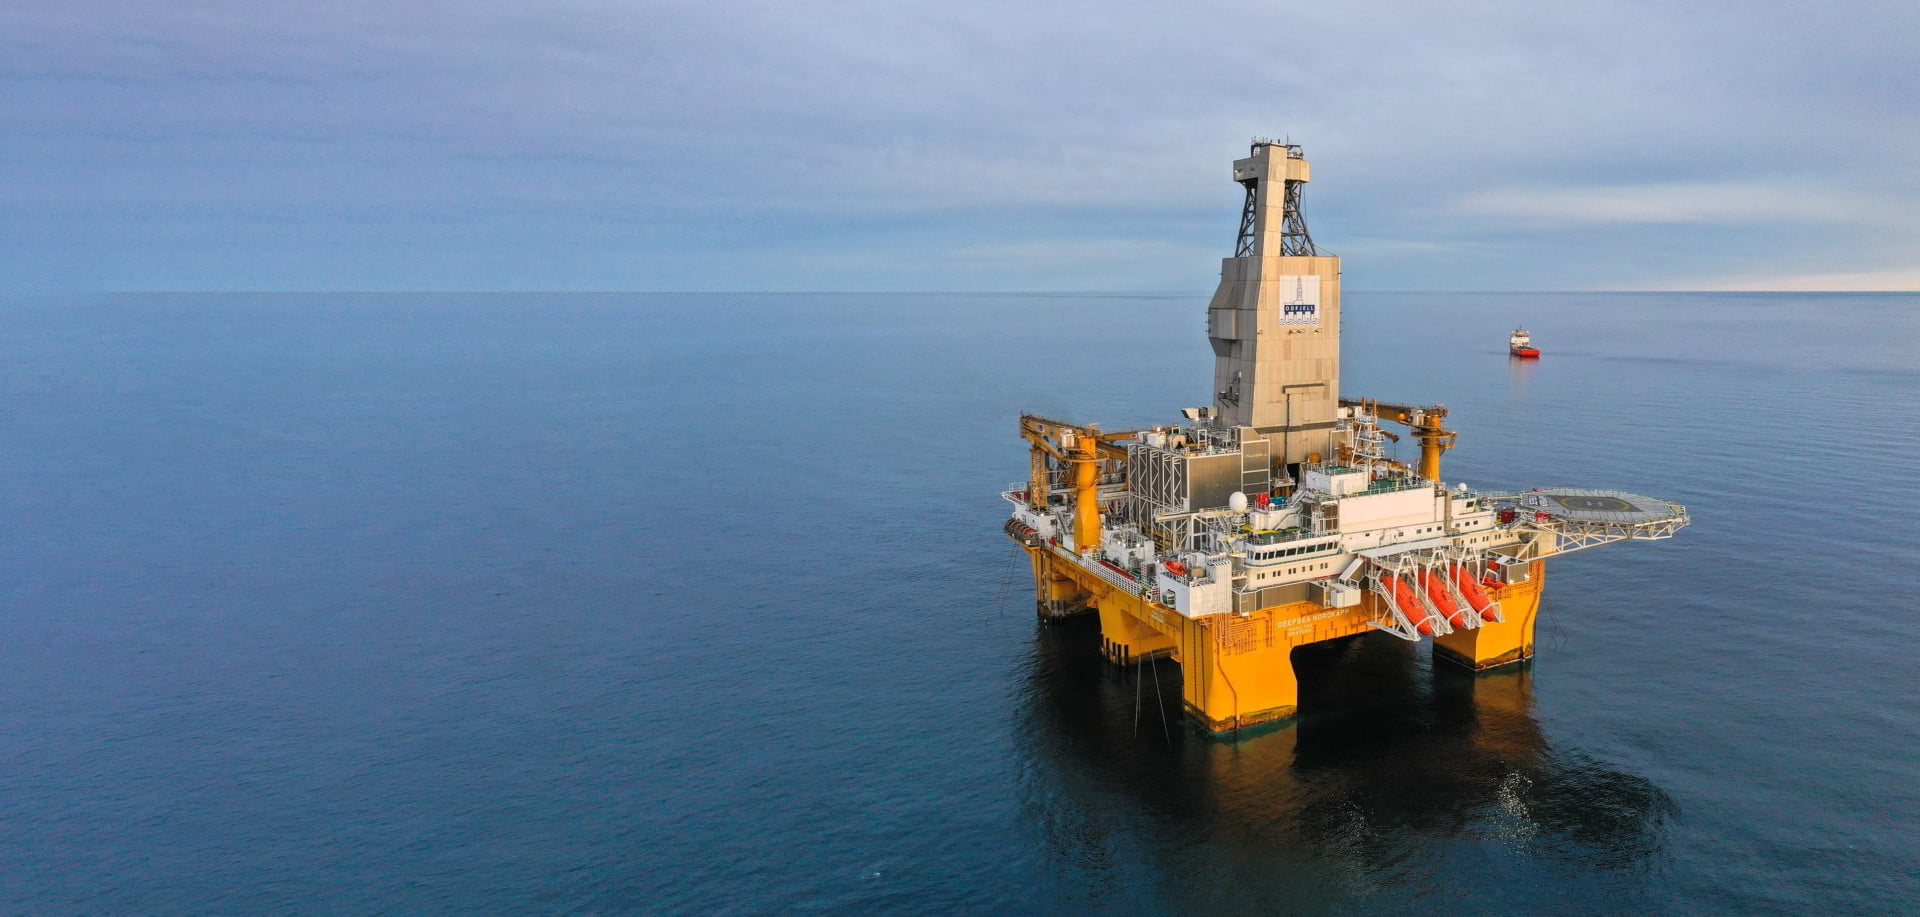 More work for Odfjell rig with Aker BP